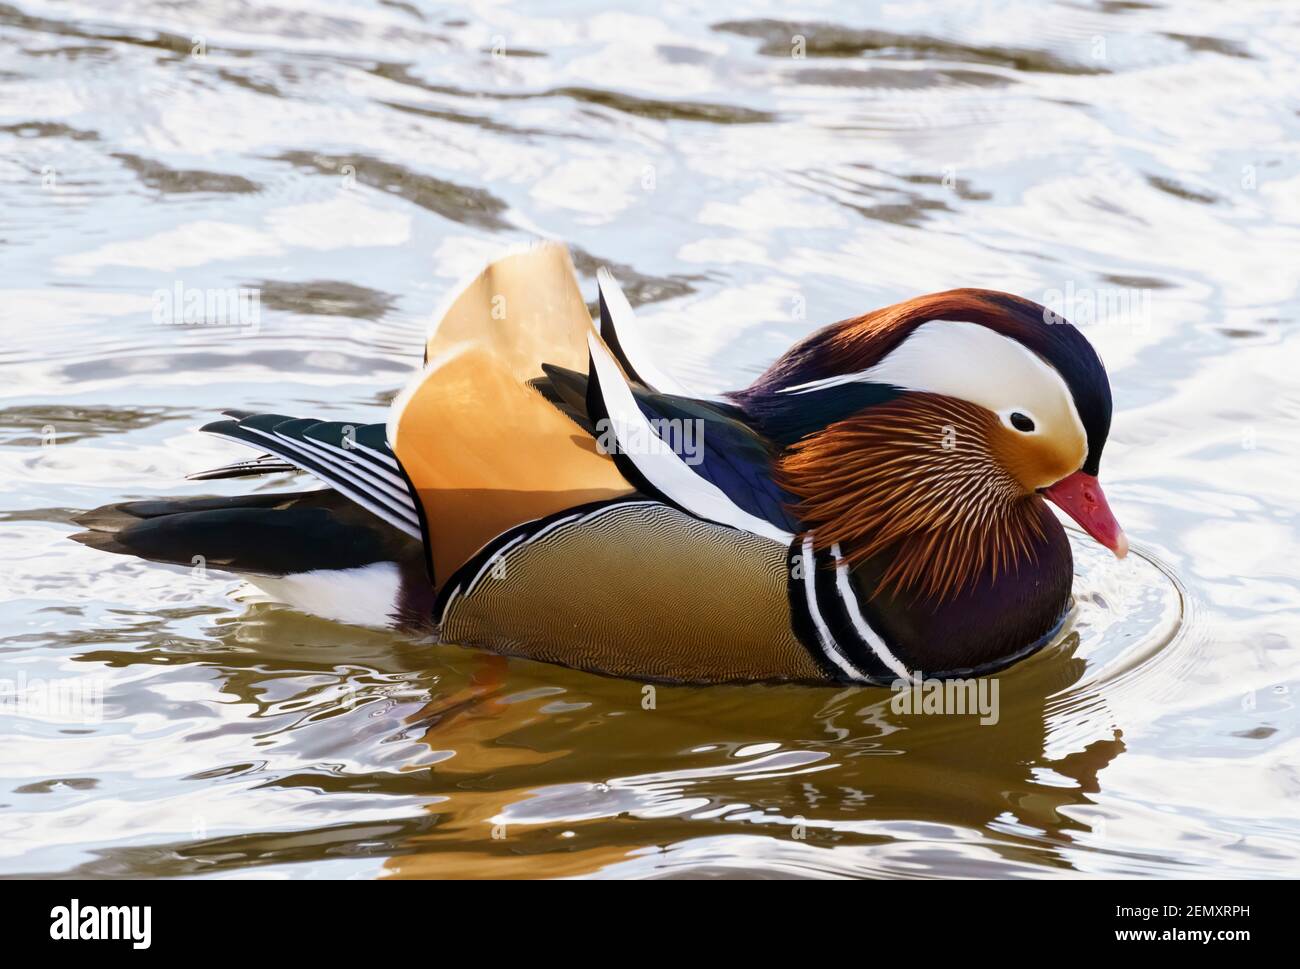 Visiting resident - a Mandarin duck drake on the River Tweed in Kelso, Scotland, in February. A single example in a flock of mallards. Stock Photo